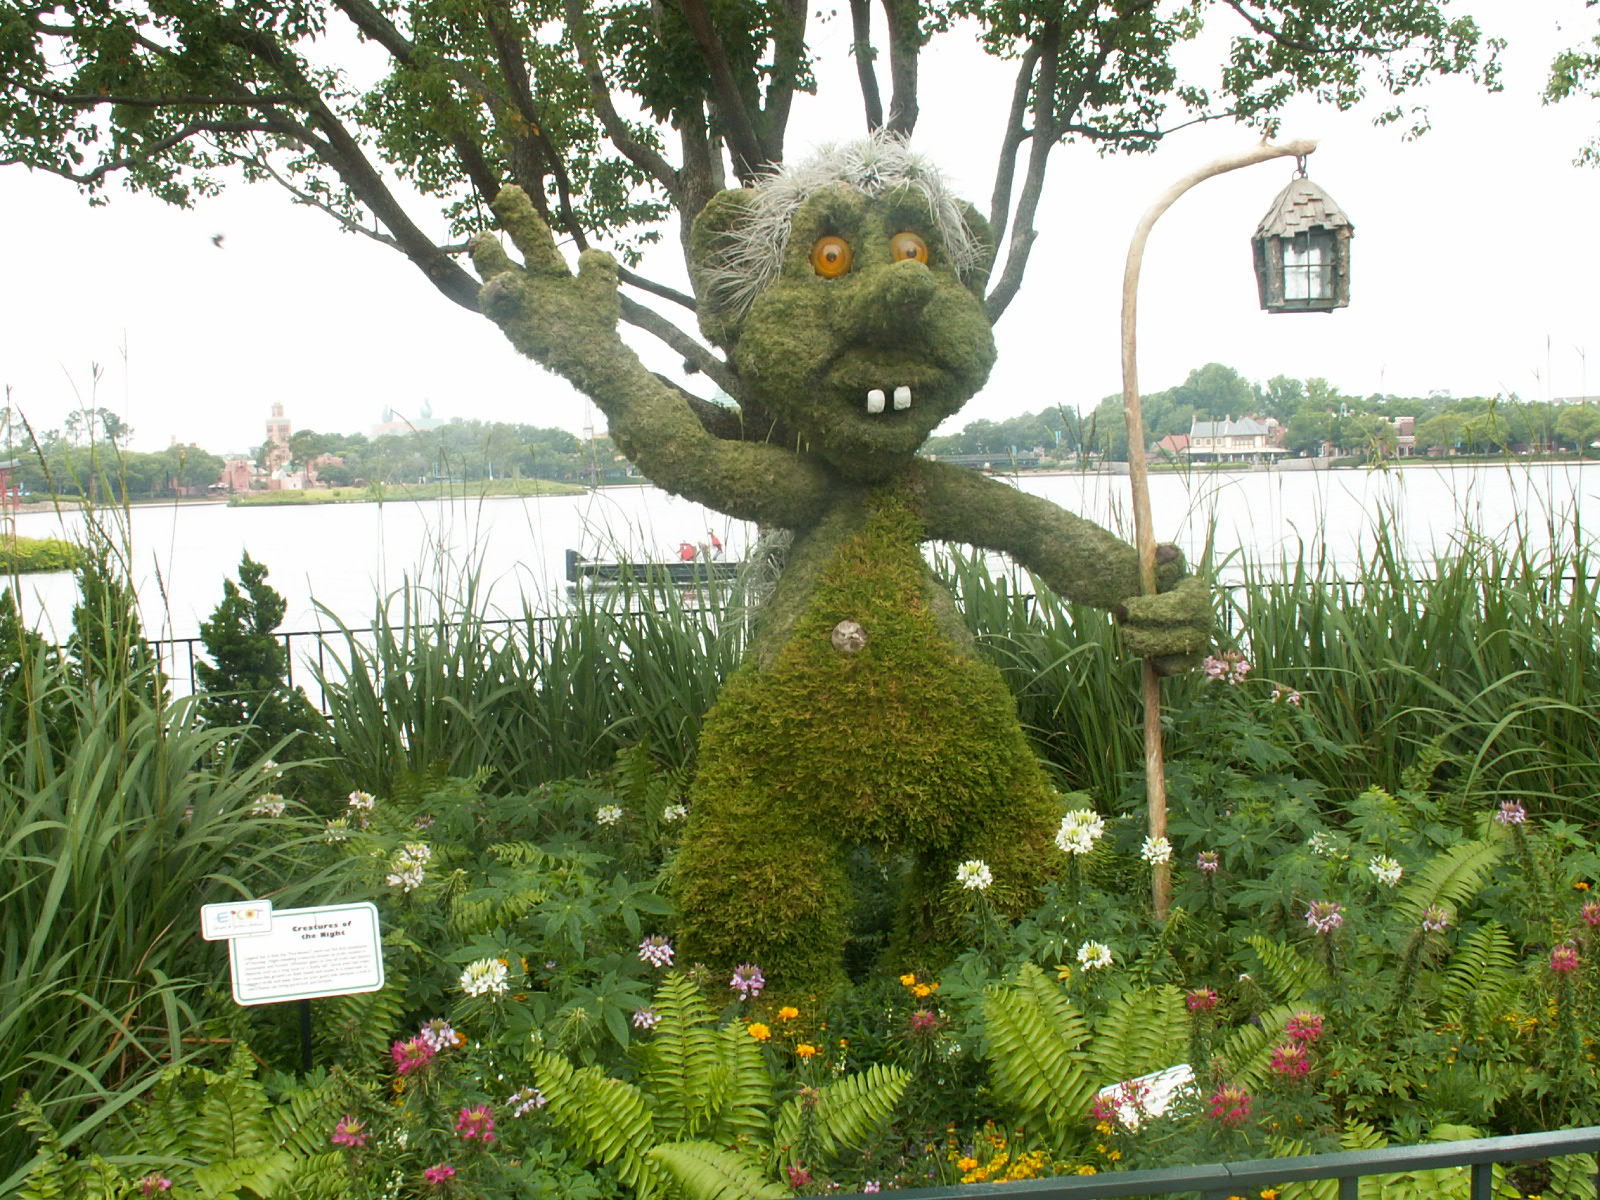 Epcot - Norway - Troll Topiary